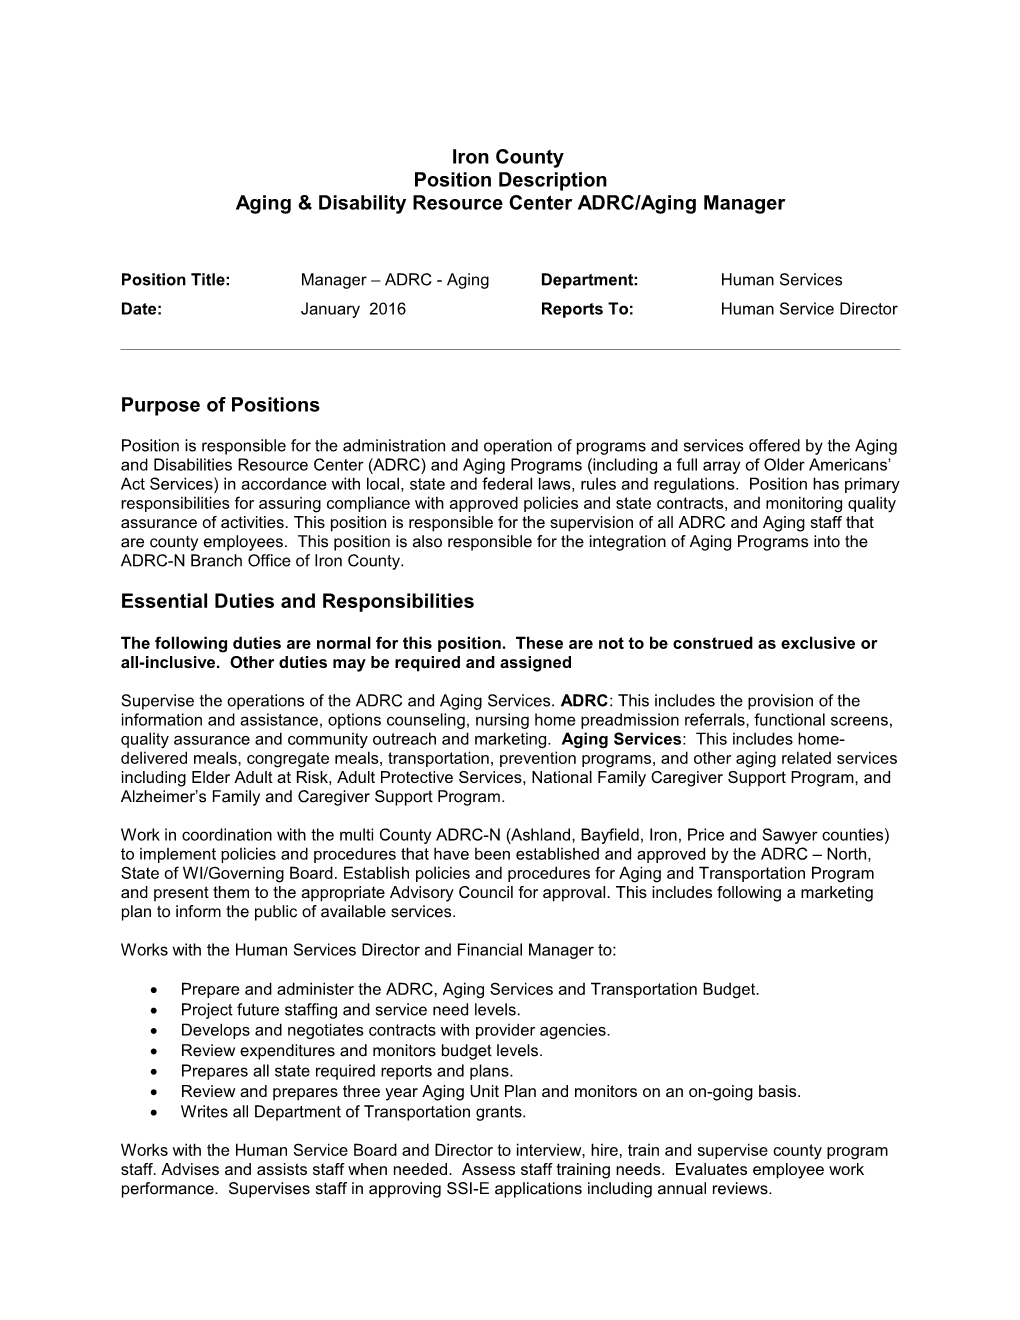 Aging & Disability Resource Center ADRC/Aging Manager